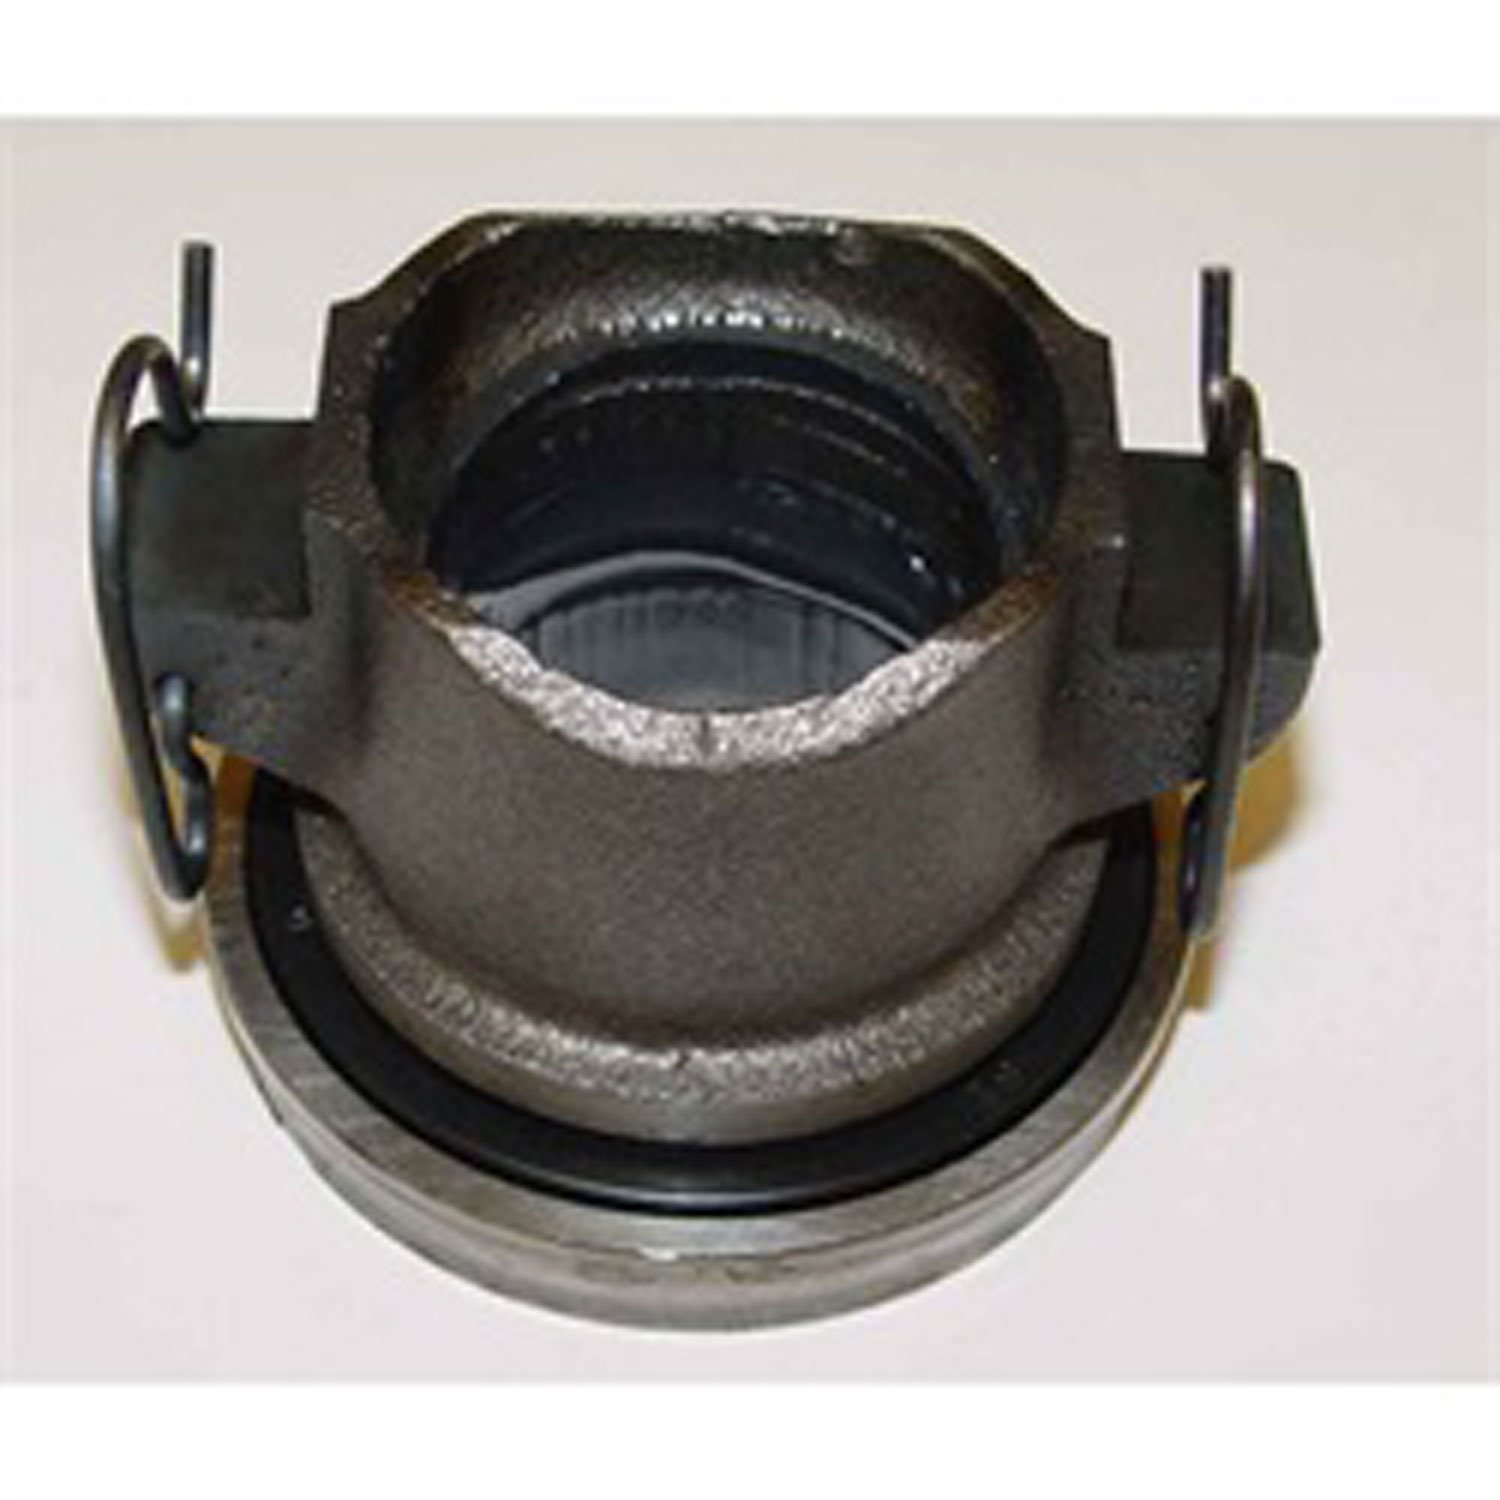 This clutch throwout bearing from Omix-ADA fits 93-16 Jeep Cherokees Grand Cherokees Libertys and Wr